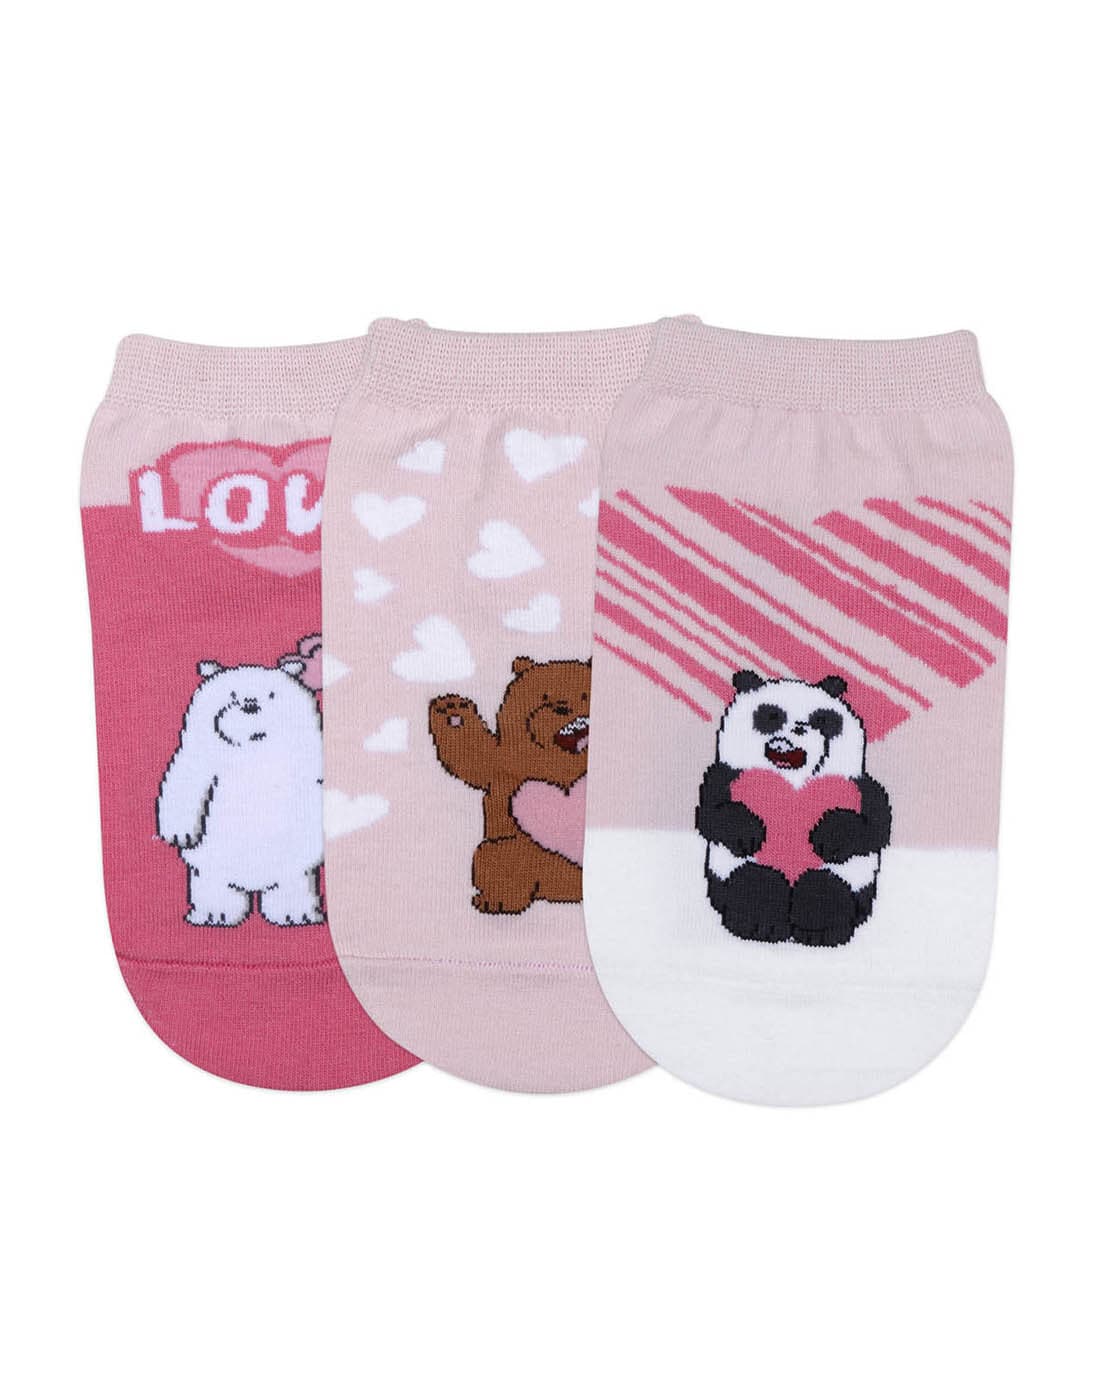 WE BARE BEARS BY BALENZIA HIGH ANKLE SOCKS FOR WOMEN (PACK OF 3 PAIRS/1U)-MULTICOLOR